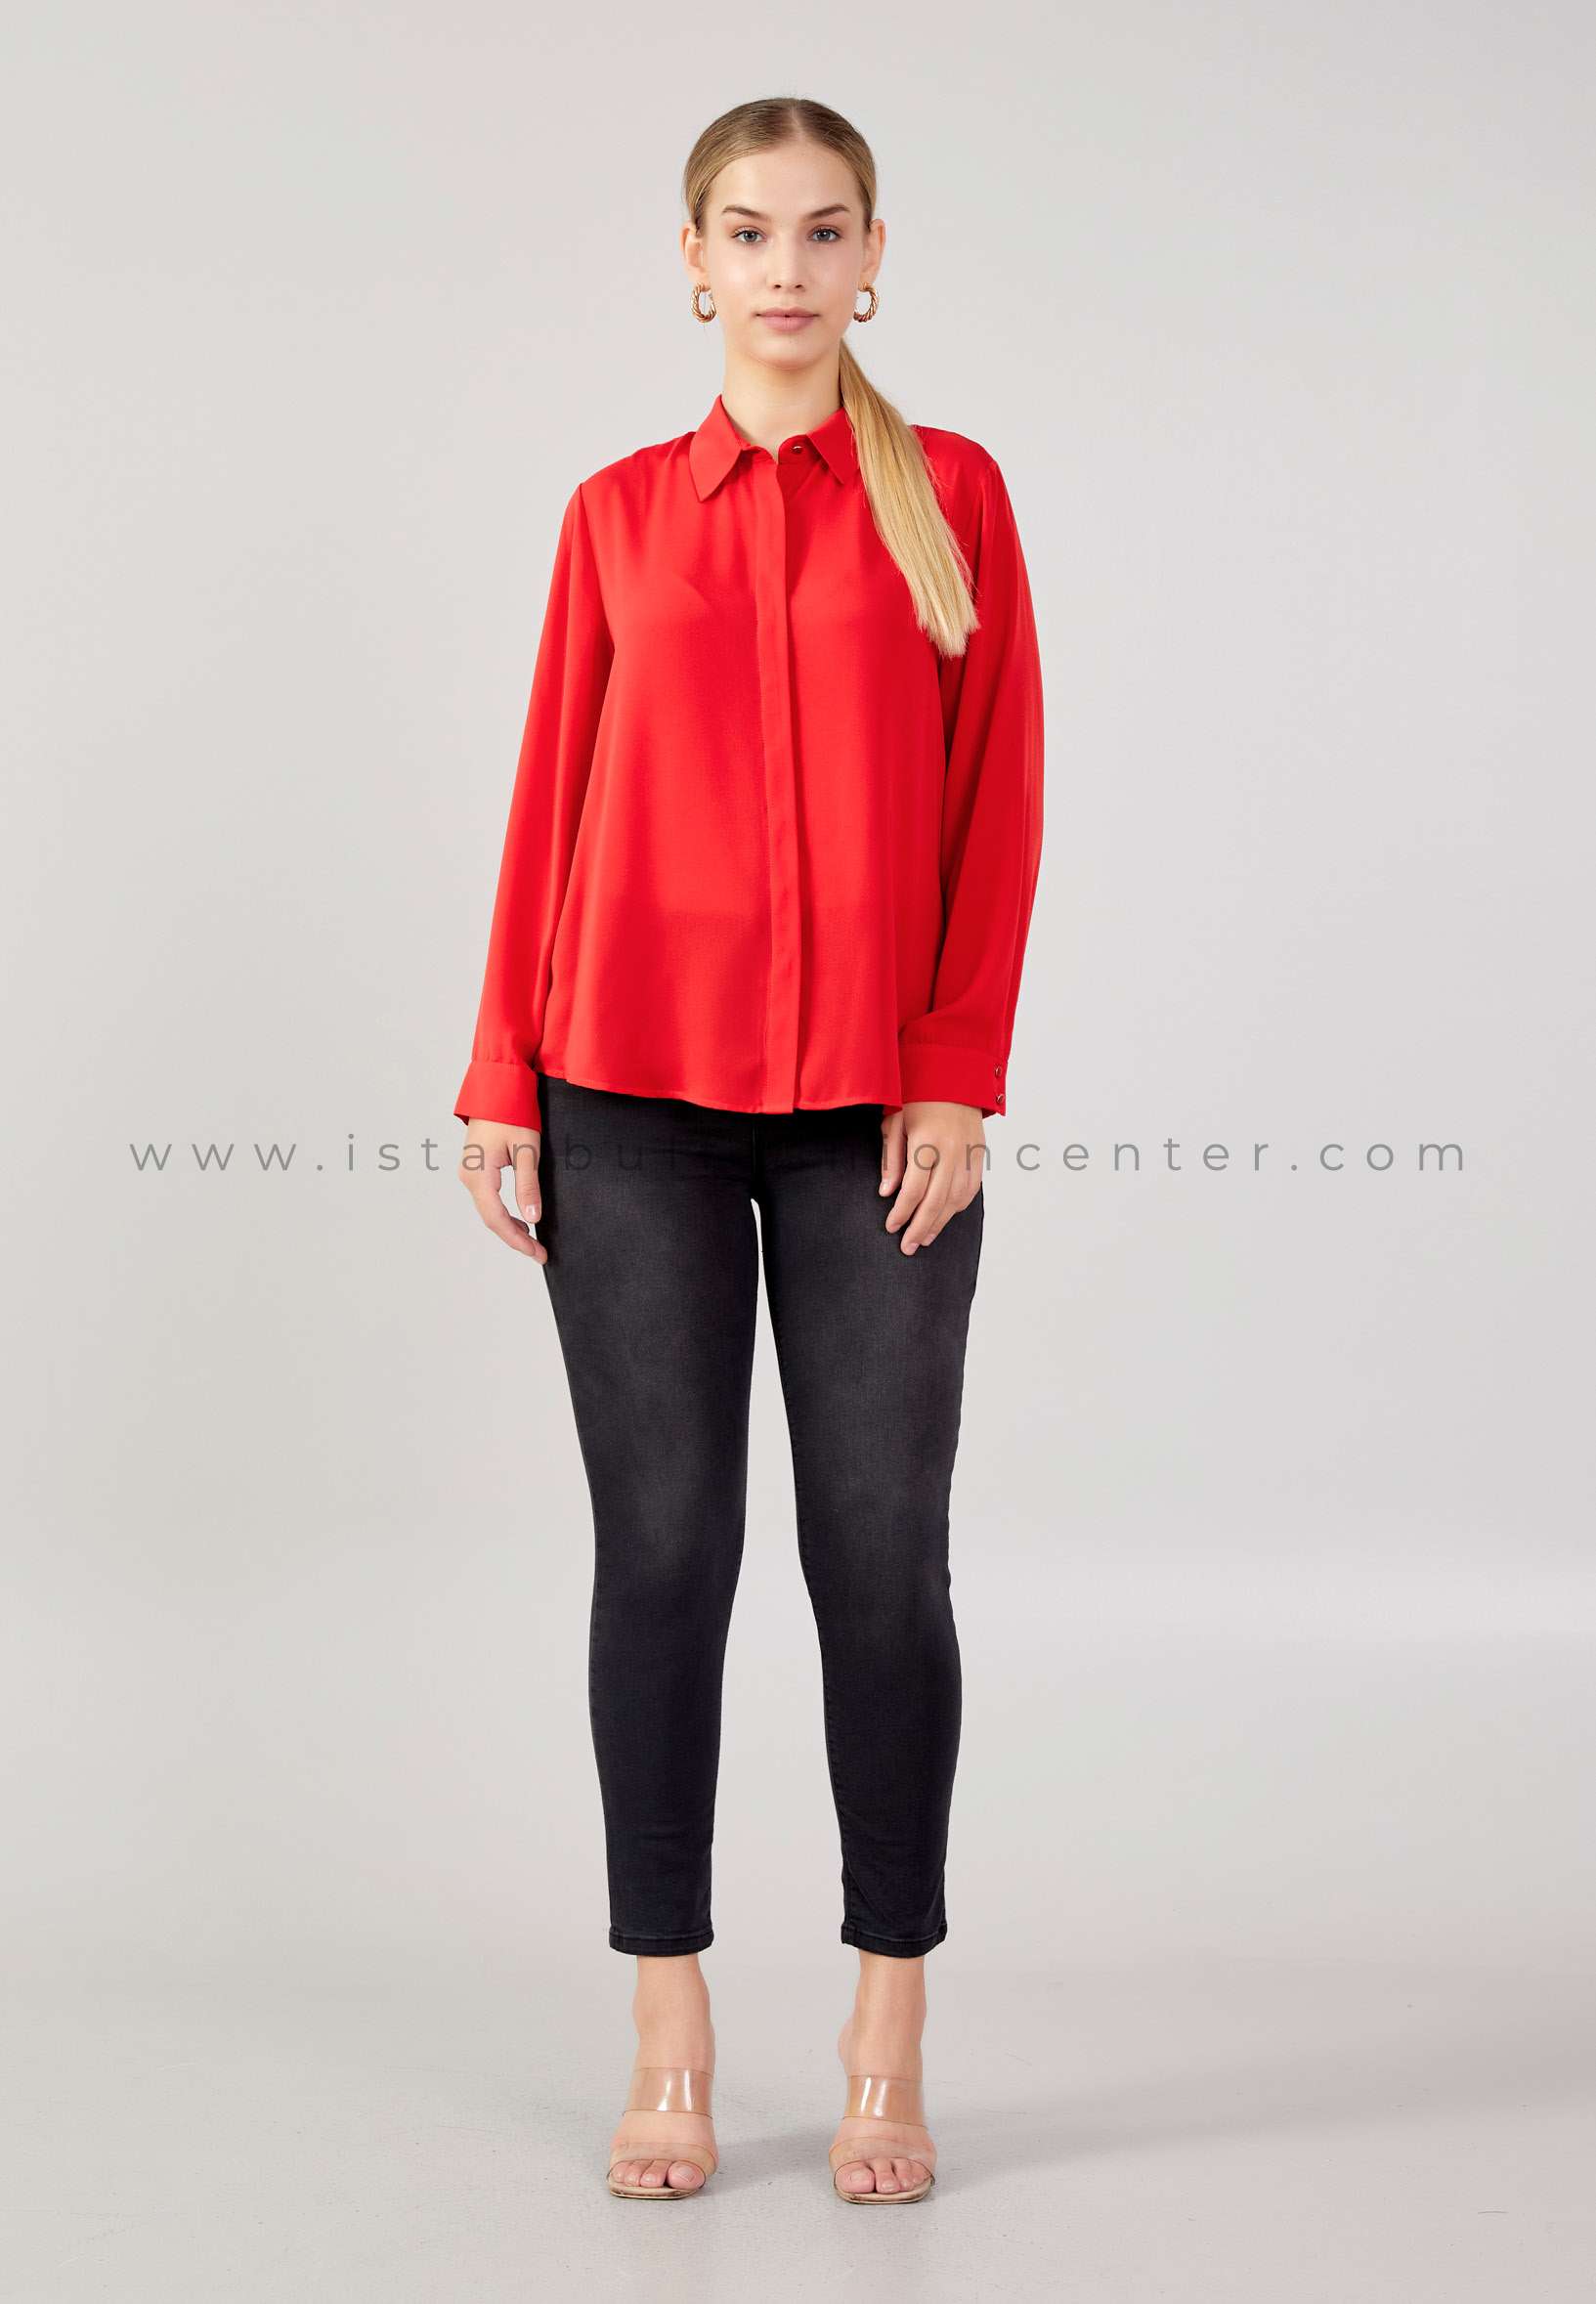  Plus Size Red Shirt